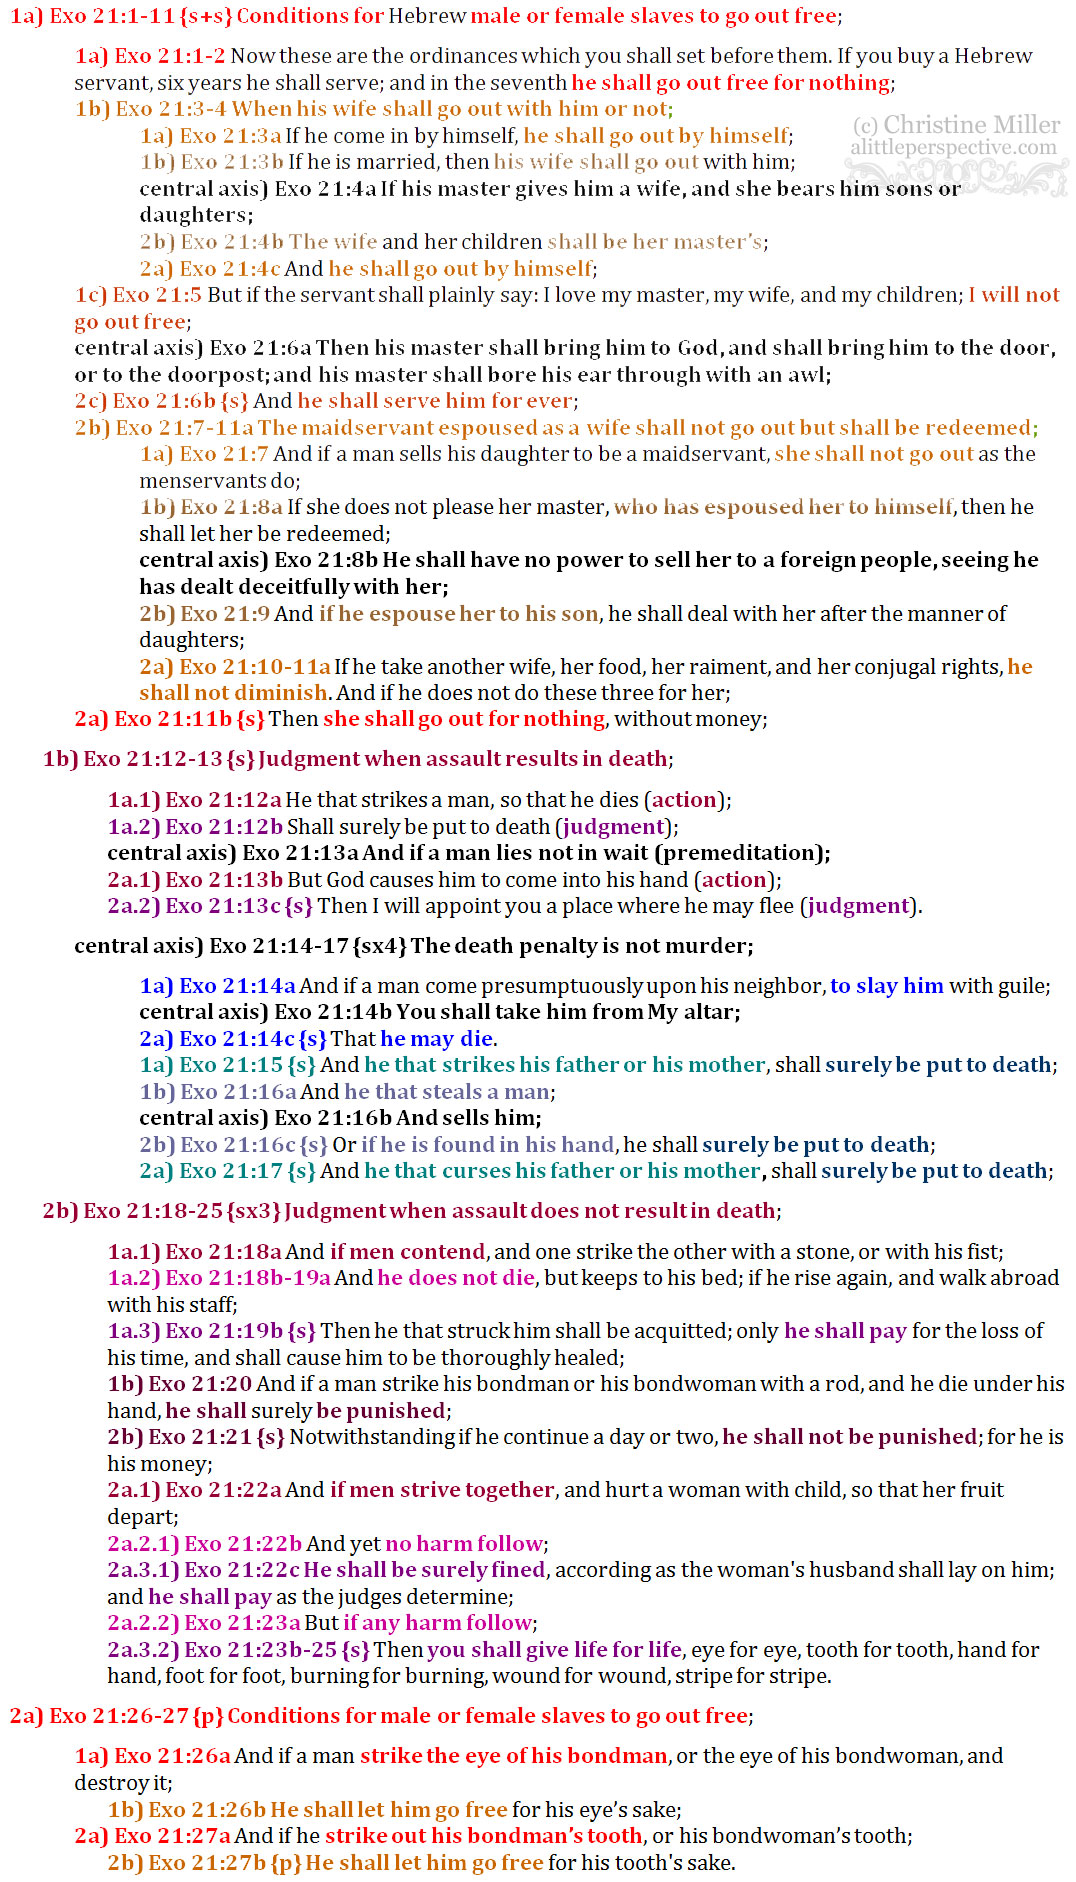 Exo 21:1-27 chiasm | christine's bible study at alittleperspective.com